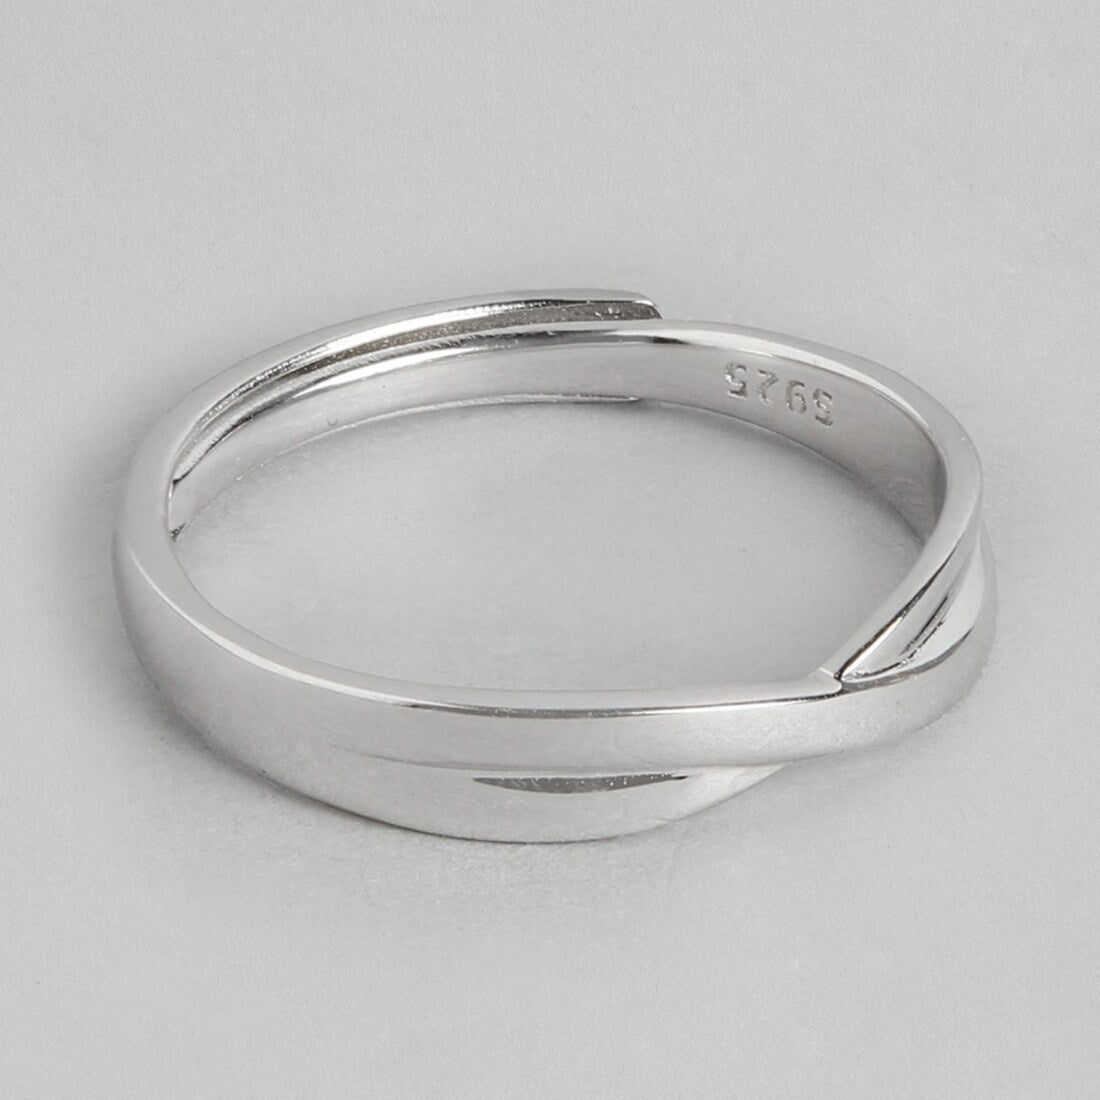 Crossed Paths Adjustable Rhodium-Plated 925 Sterling Silver Ring for Him (Adjustable)